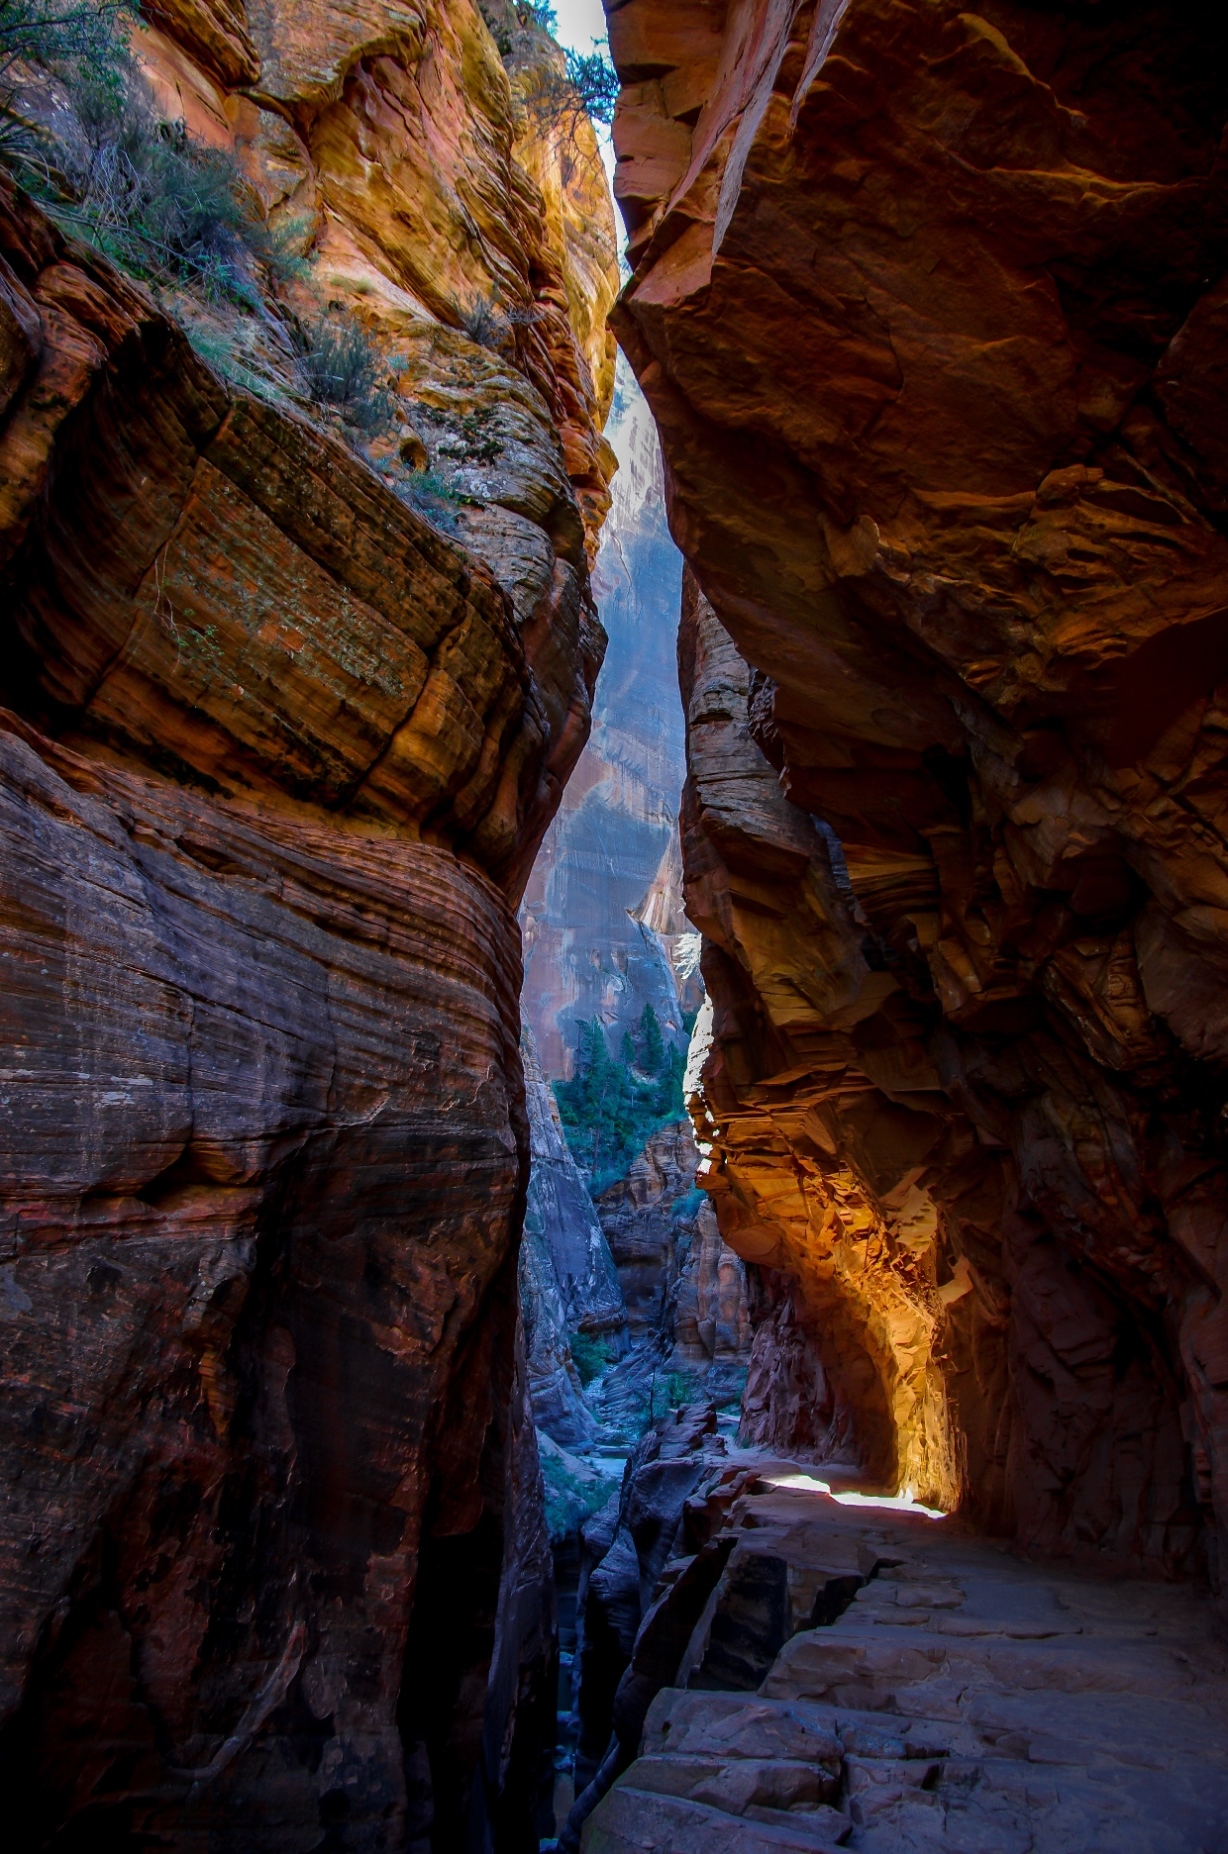 Shadow And Light In Echo Canyon, On Trail To Observation Point In Zion National Park, UT